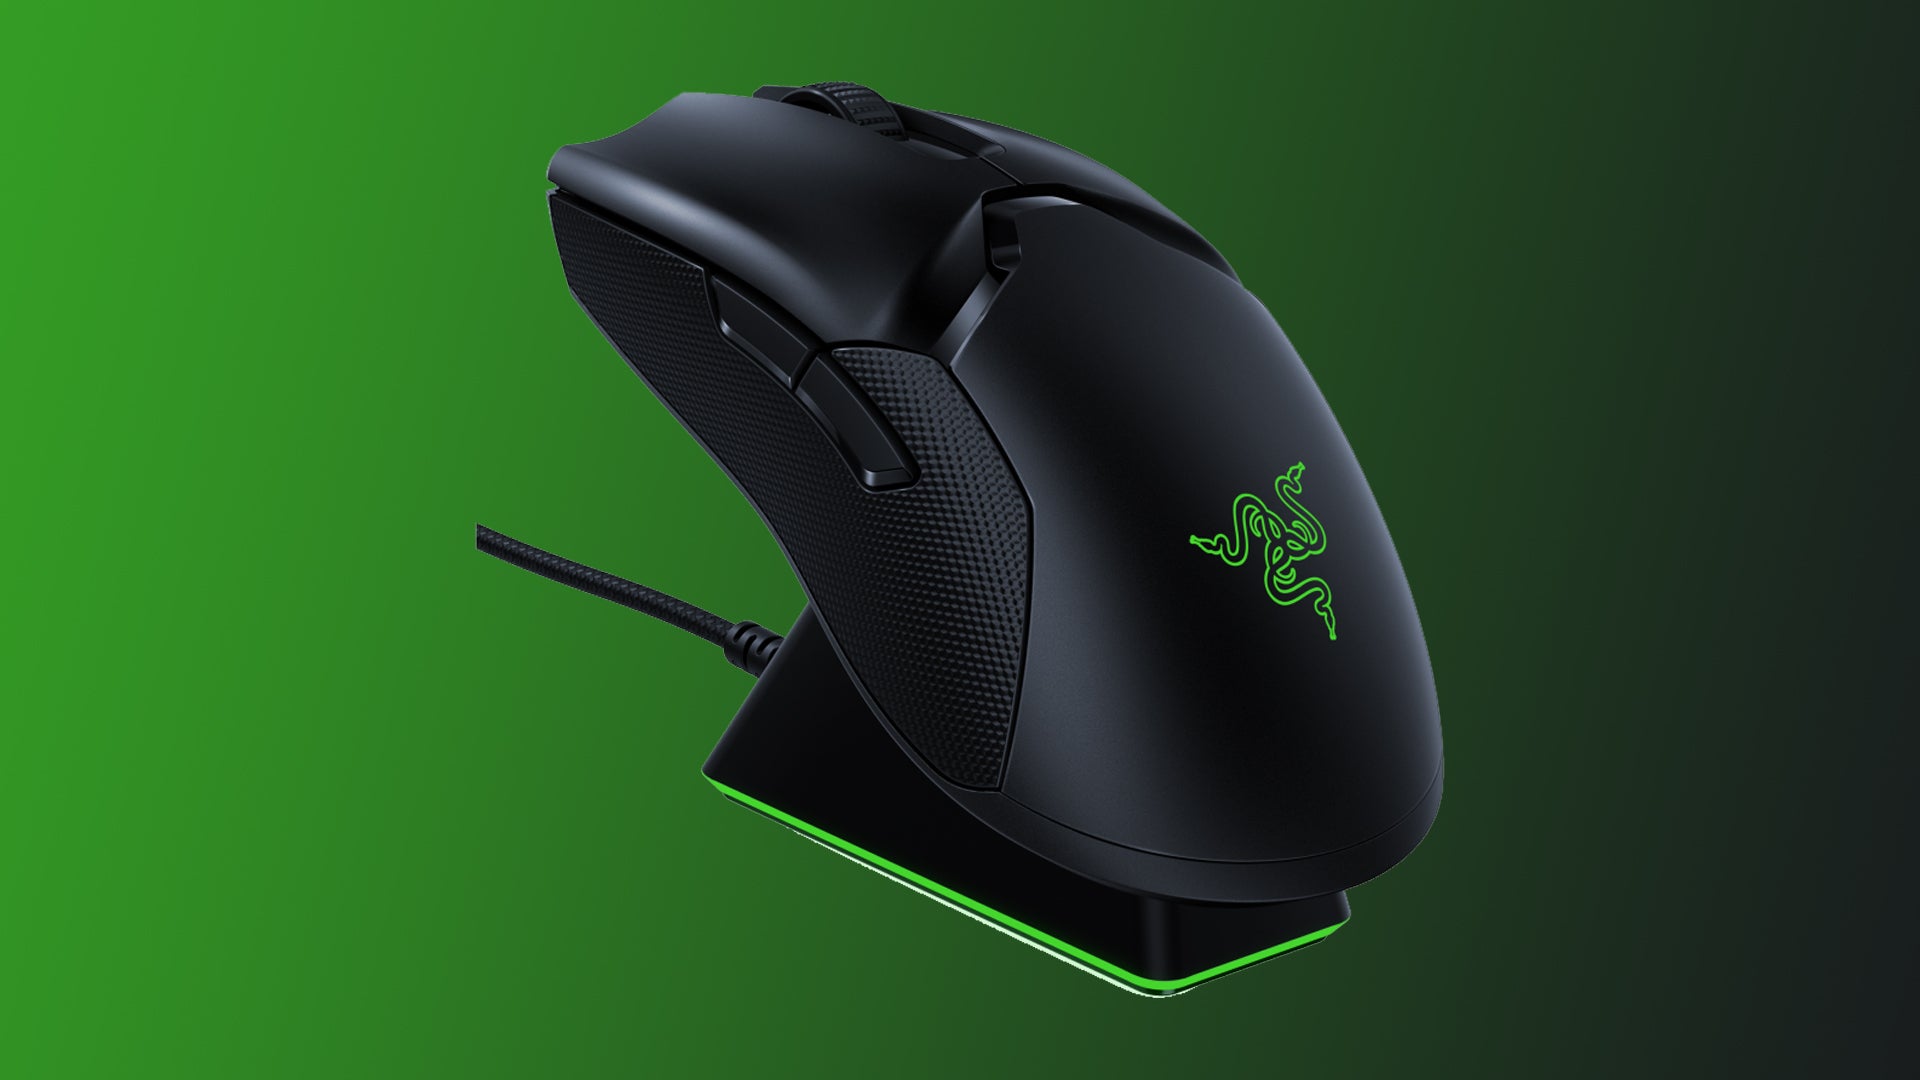 Image of a Razer Viper Ultimate gaming mouse on a green to black gradient background.